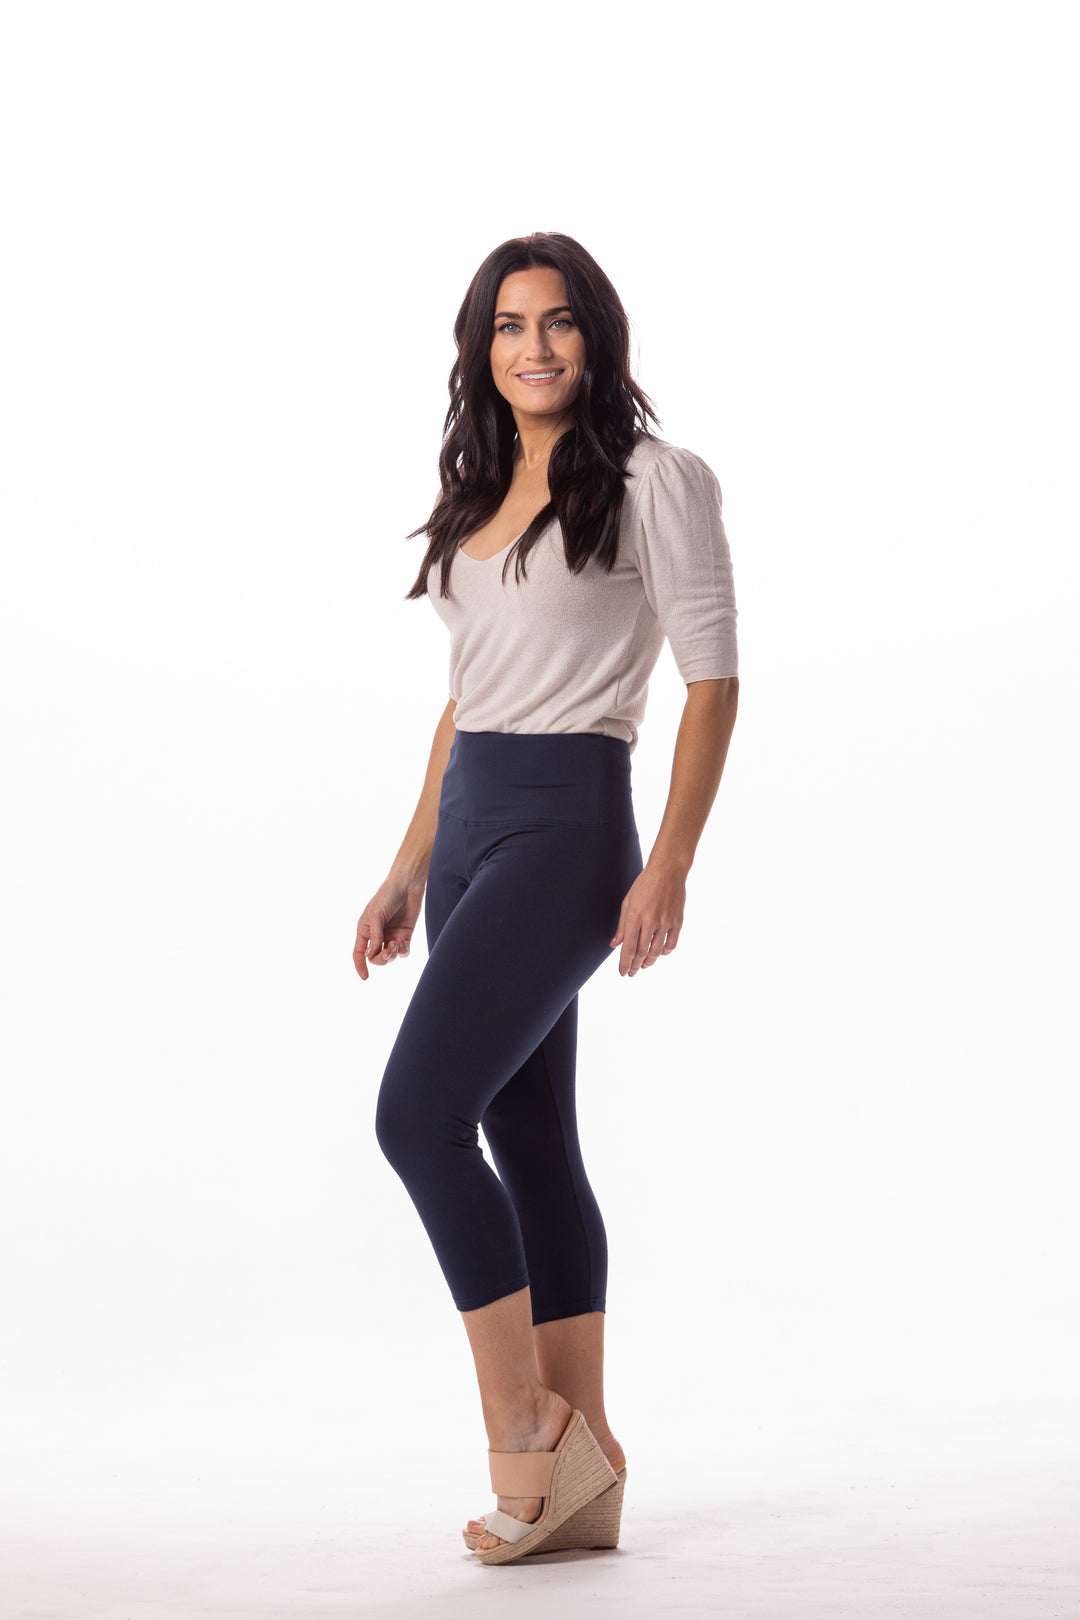 MIX IT UP! LEGGINGS or CAPRI'S W/YOUR FAVE TOP!) – RIZZQUE CLOTHING